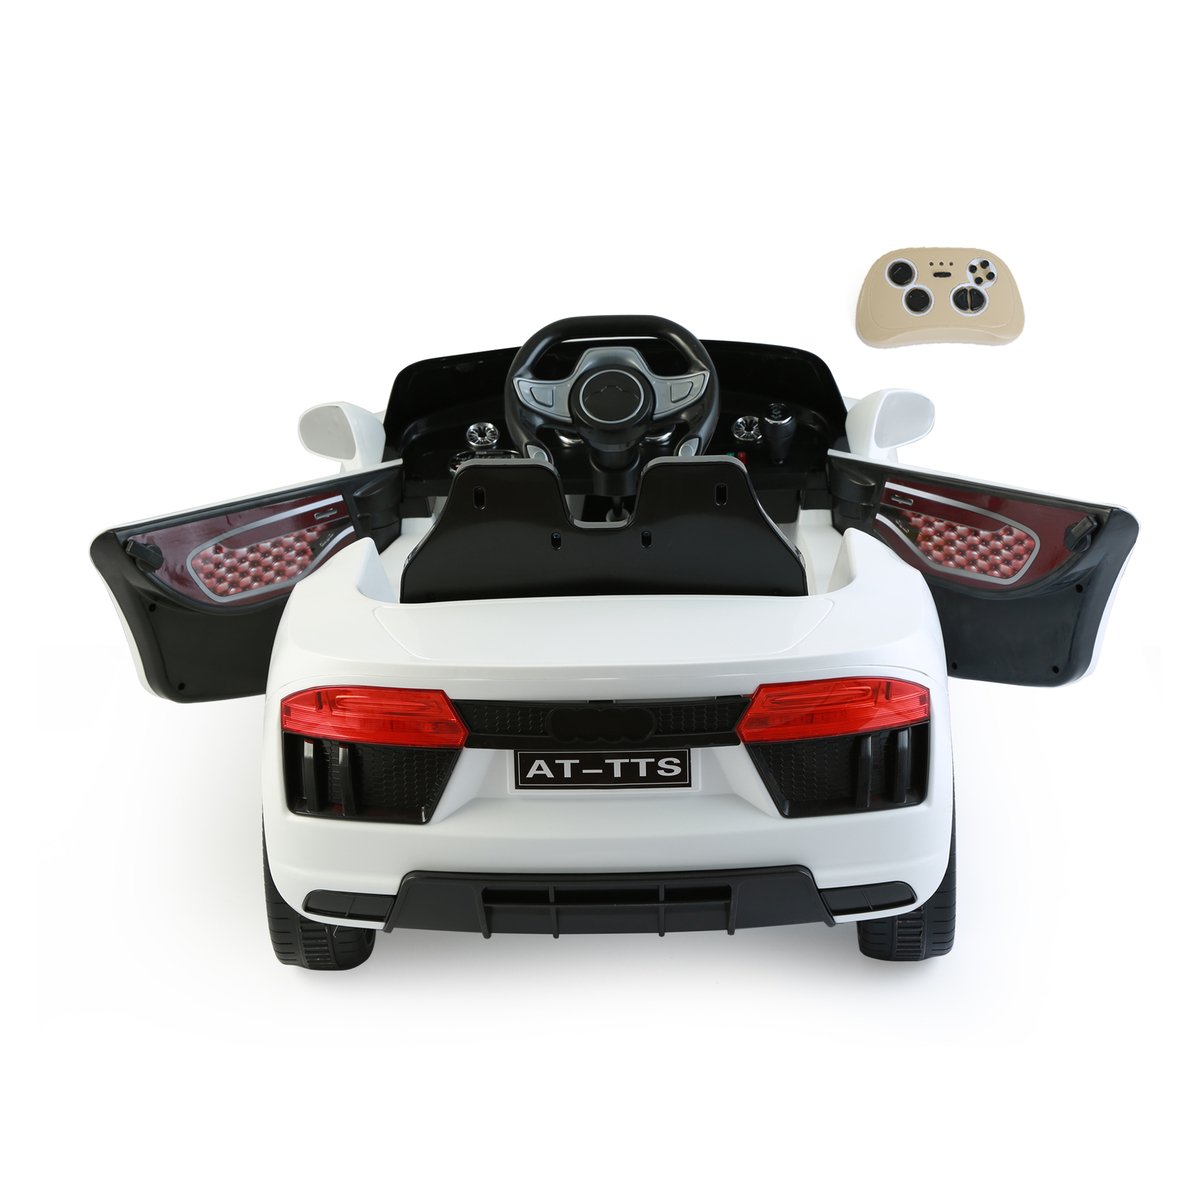 Skid Fusion Rechargeable Remote Control Ride on Car Assorted Color TTS